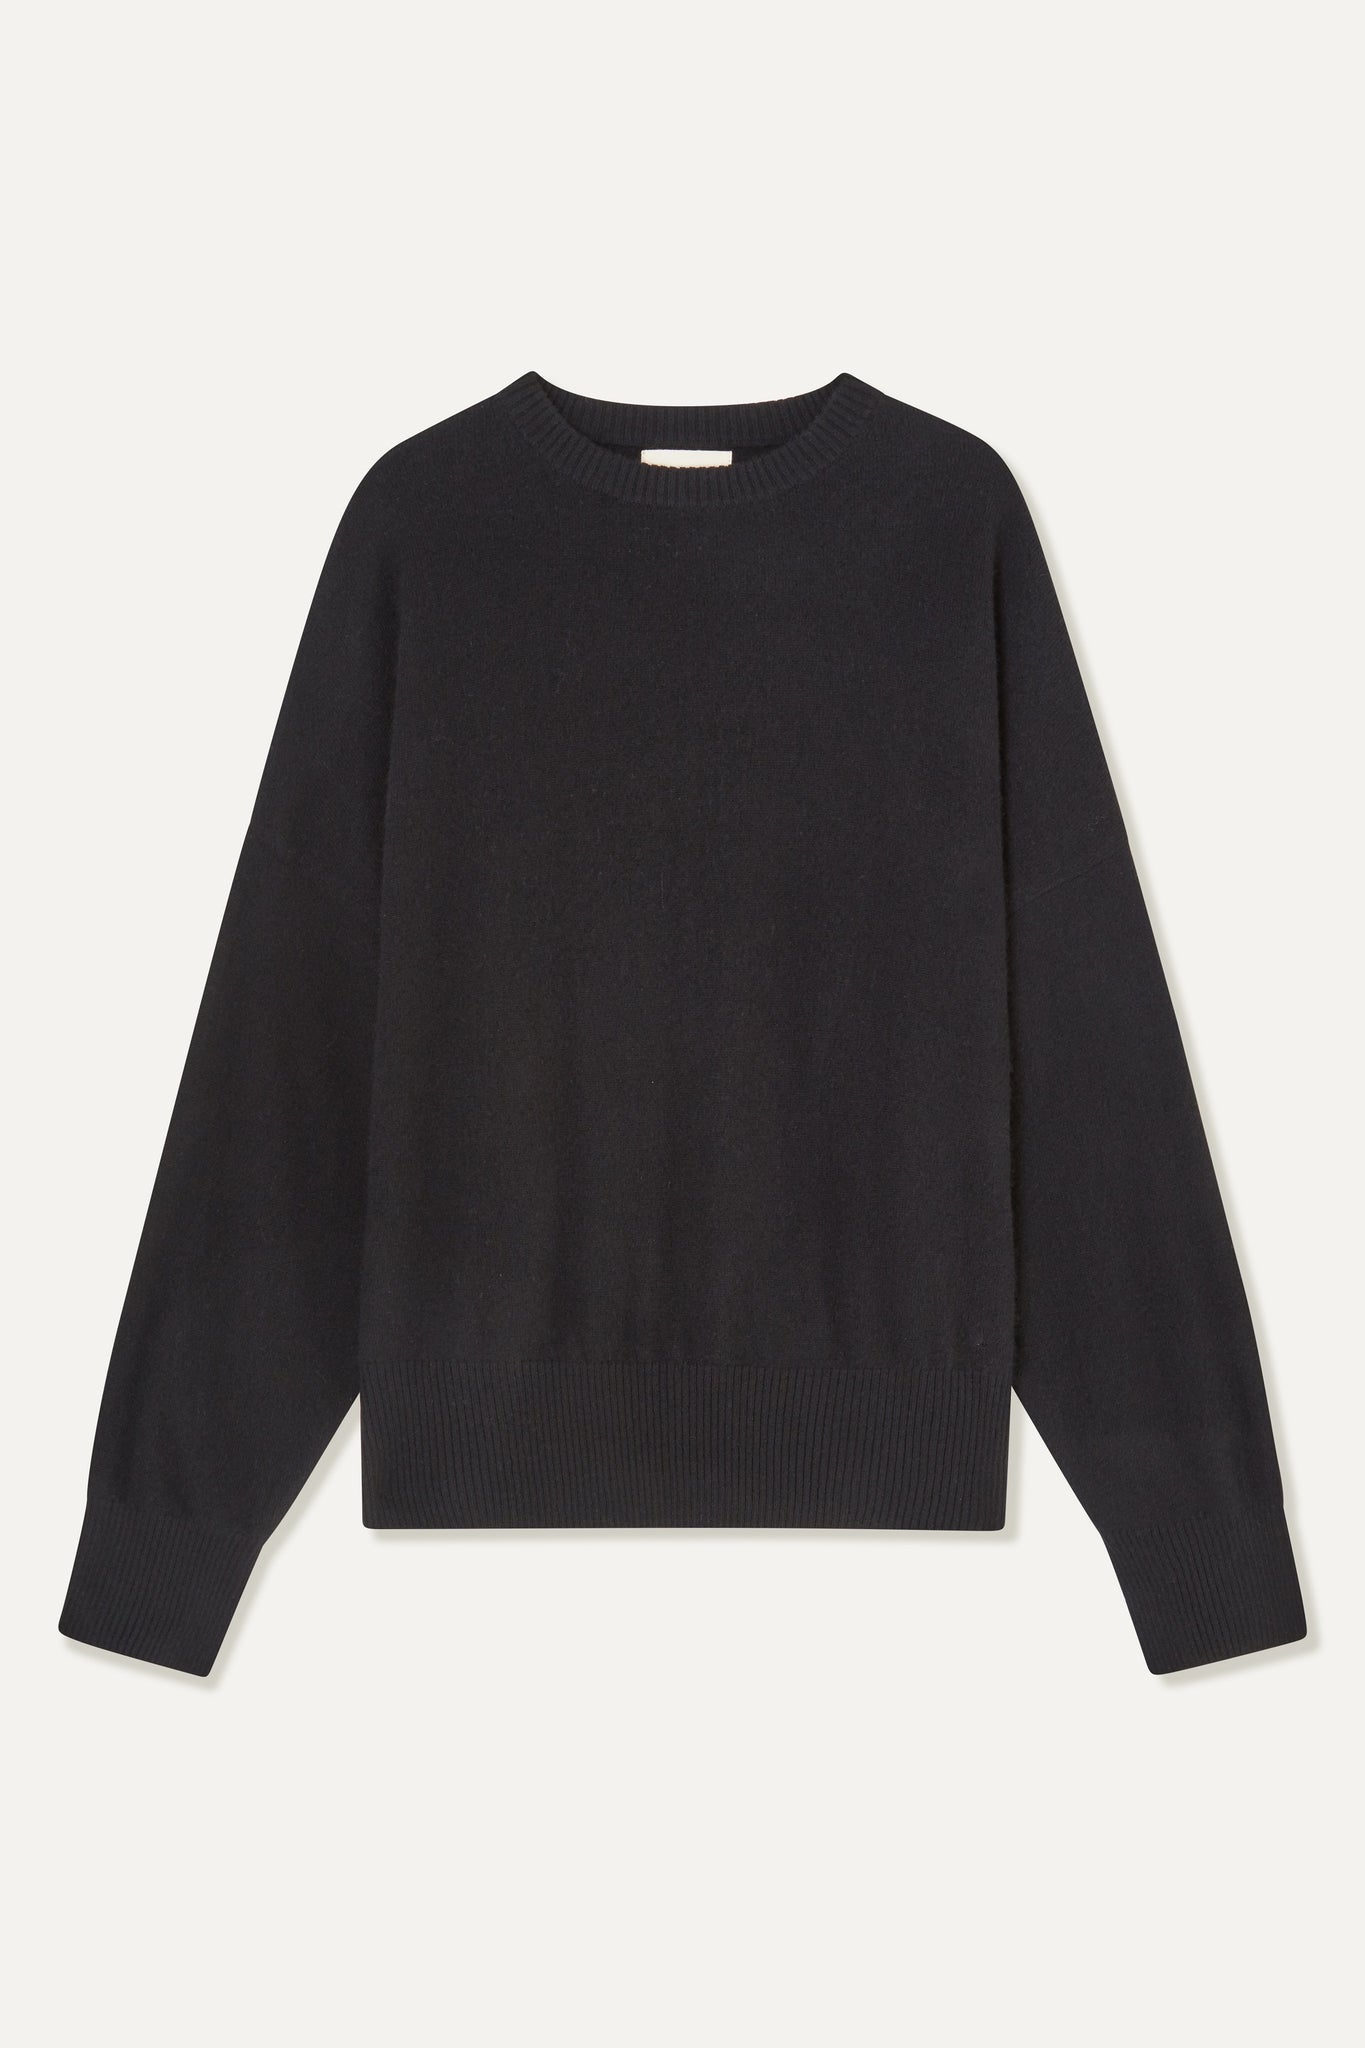 ANAA CASHMERE SWEATER BY LOULOU STUDIO IN BLACK